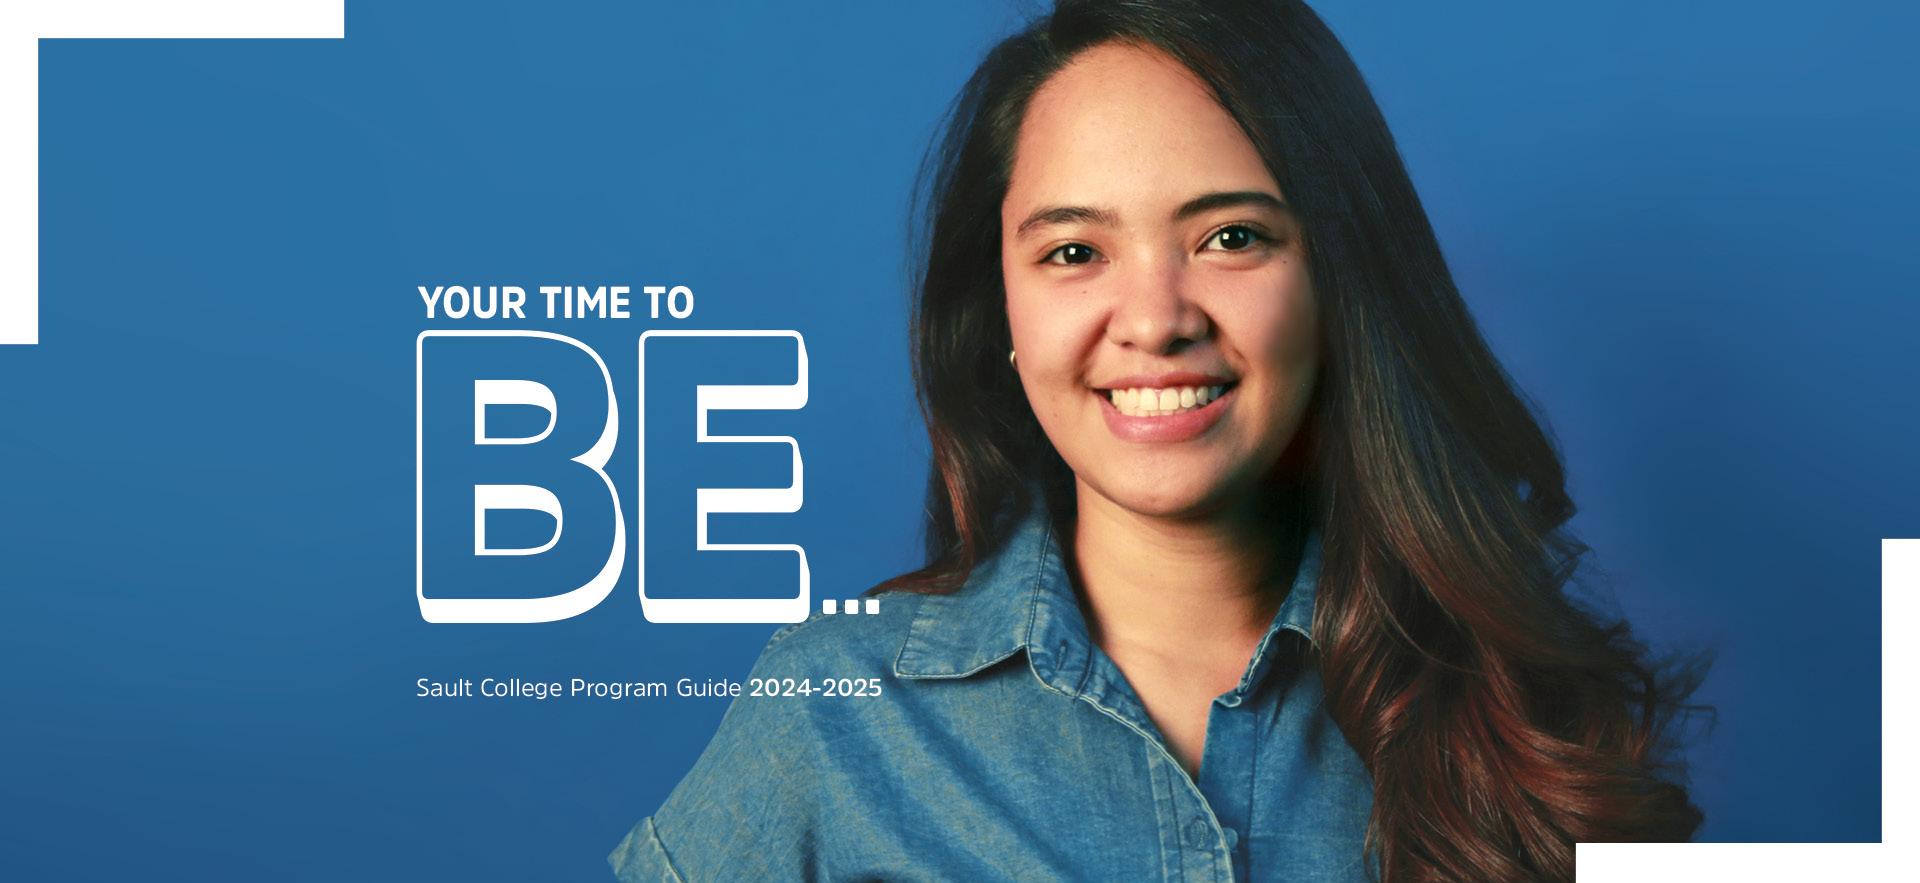 Female student in blue shirt smiling with blue background and text overlay "your time to BE..." for Sault College Program Guide for 2024-25